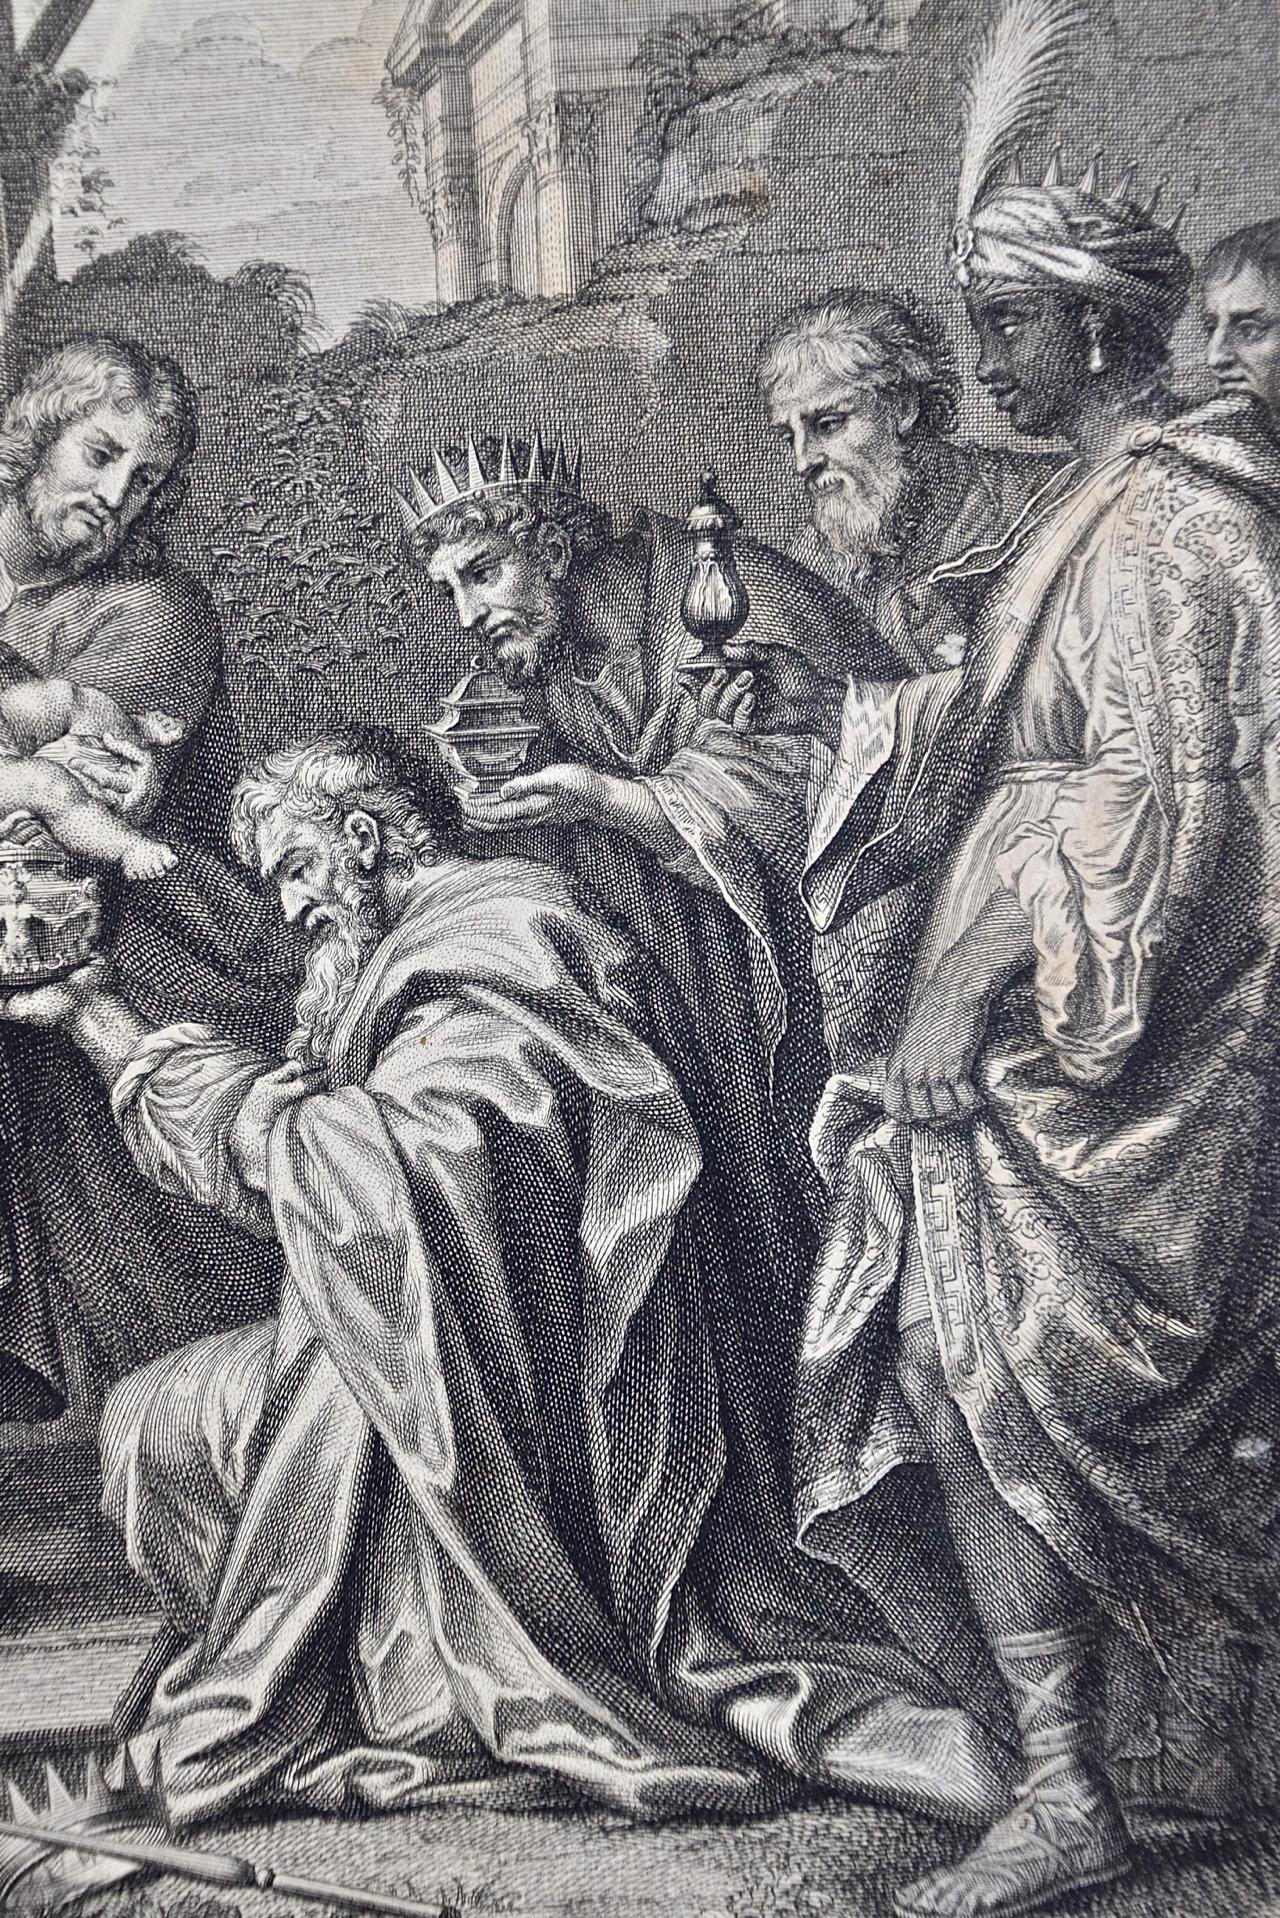 The Gift of the Magi: An 18th C. Religious Engraving by Vale, After Calmarat - Old Masters Print by S. Vale after Calmarat